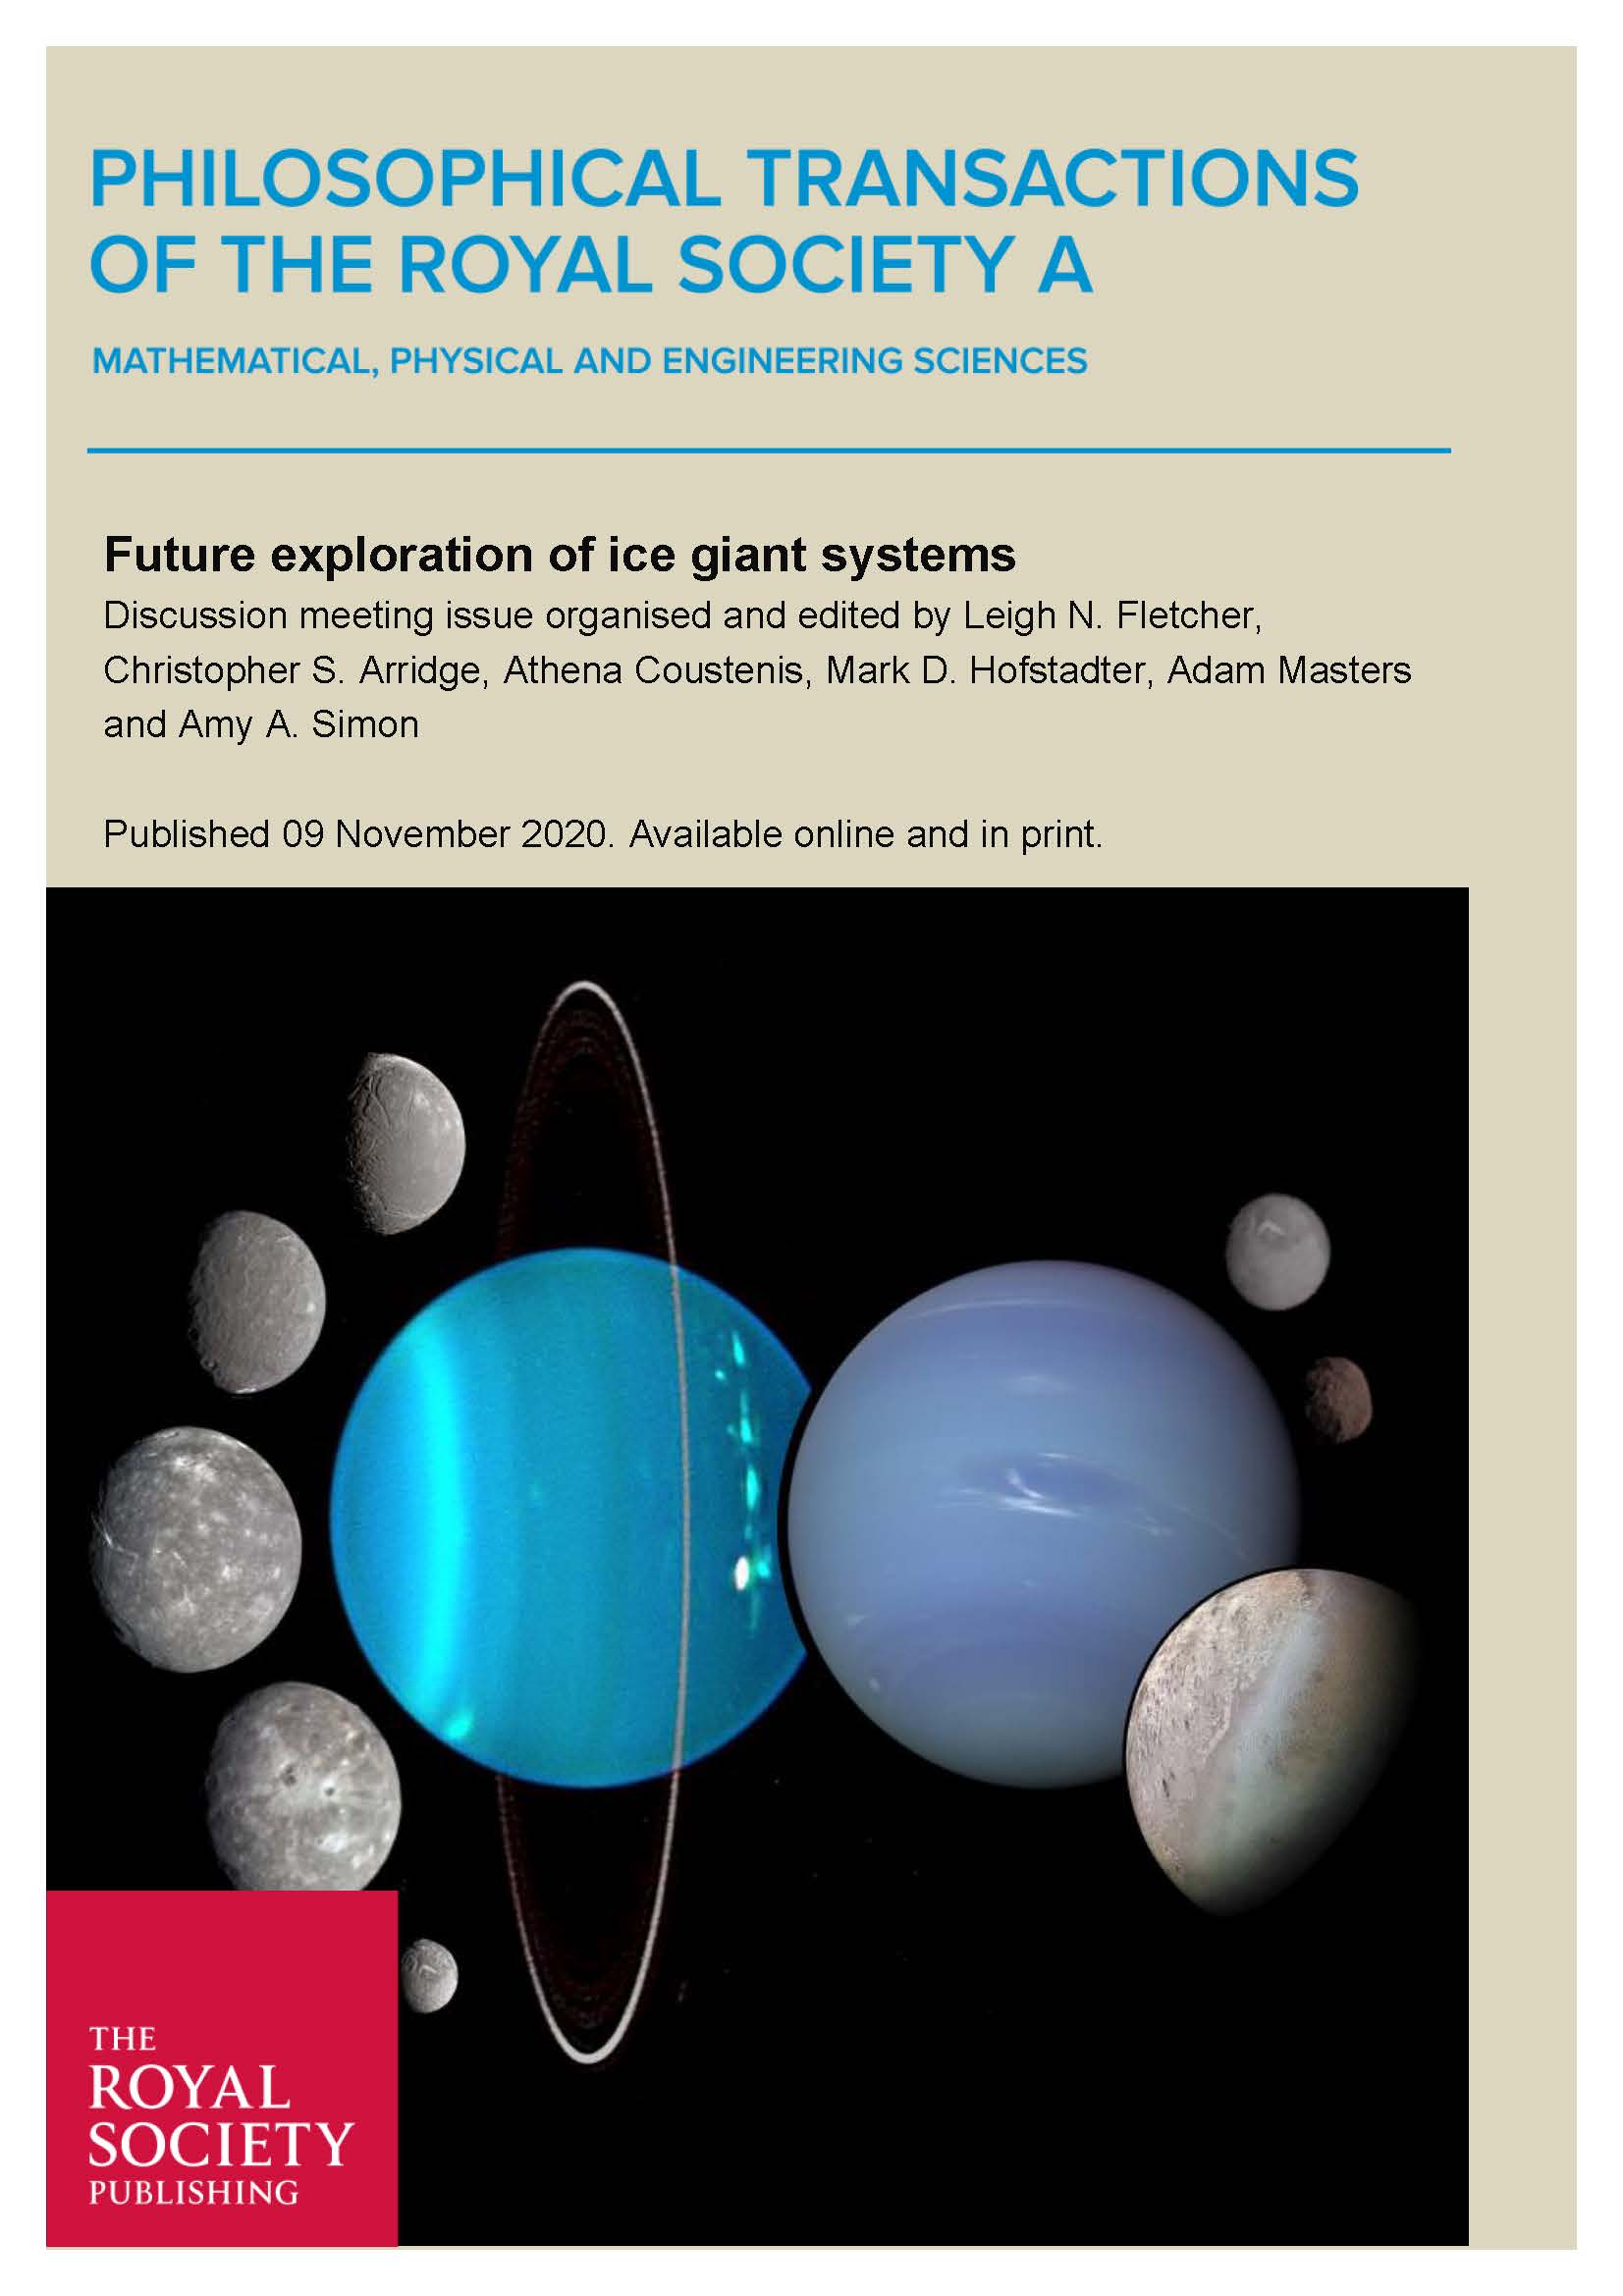 Front cover of the Royal Society’s special issue of Philosophical Transactions of the Royal Society A on the future exploration of the ice giants and their moons.  Credit:The Royal Society